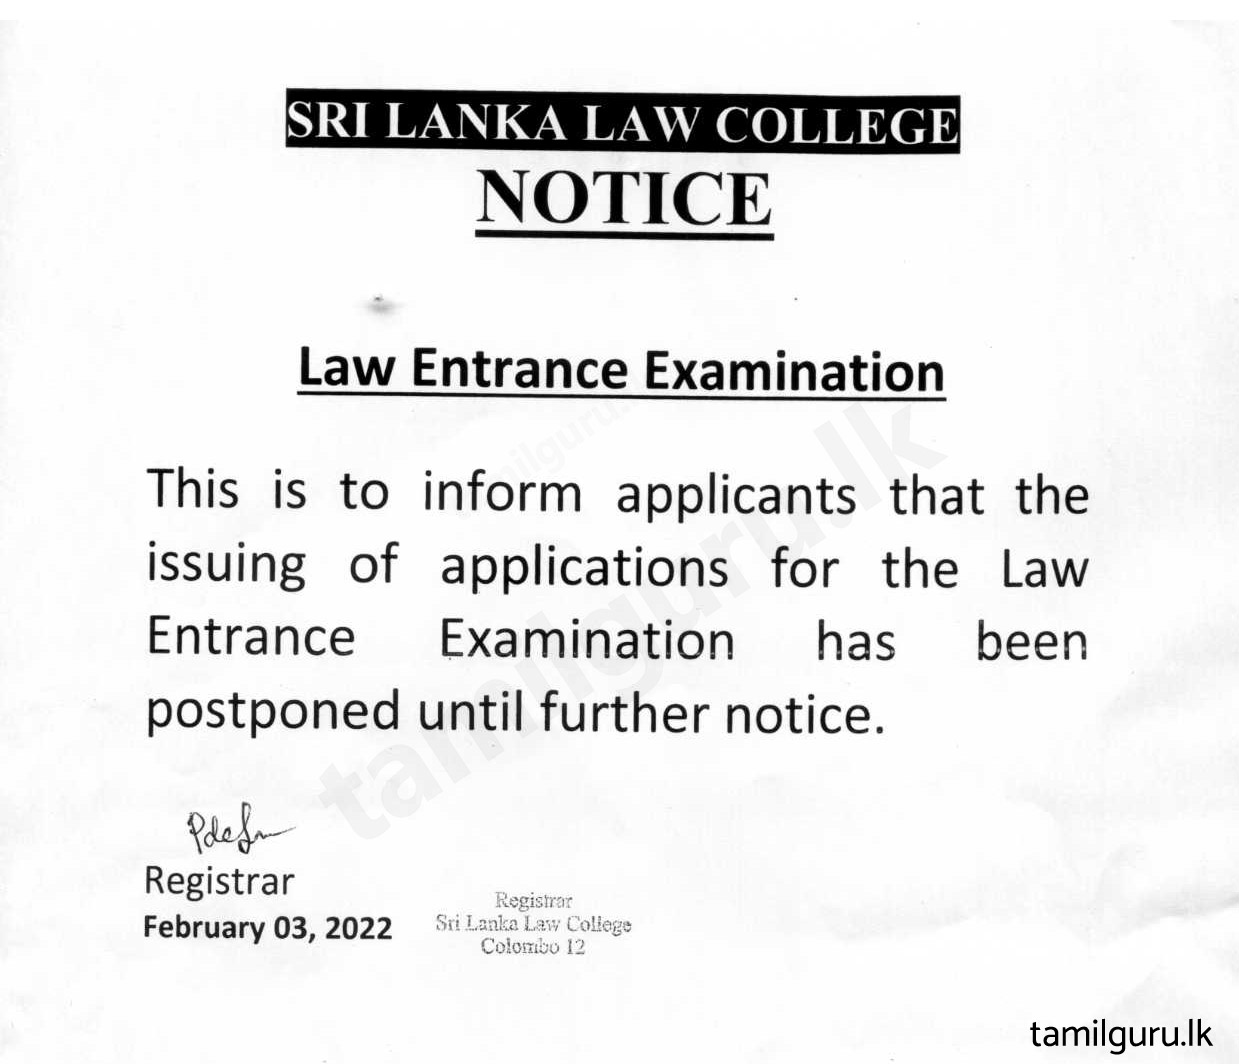 Special Notice from Sri Lanka Law College - Postponement of Issuing Applications for Law Entrance Examination 2022